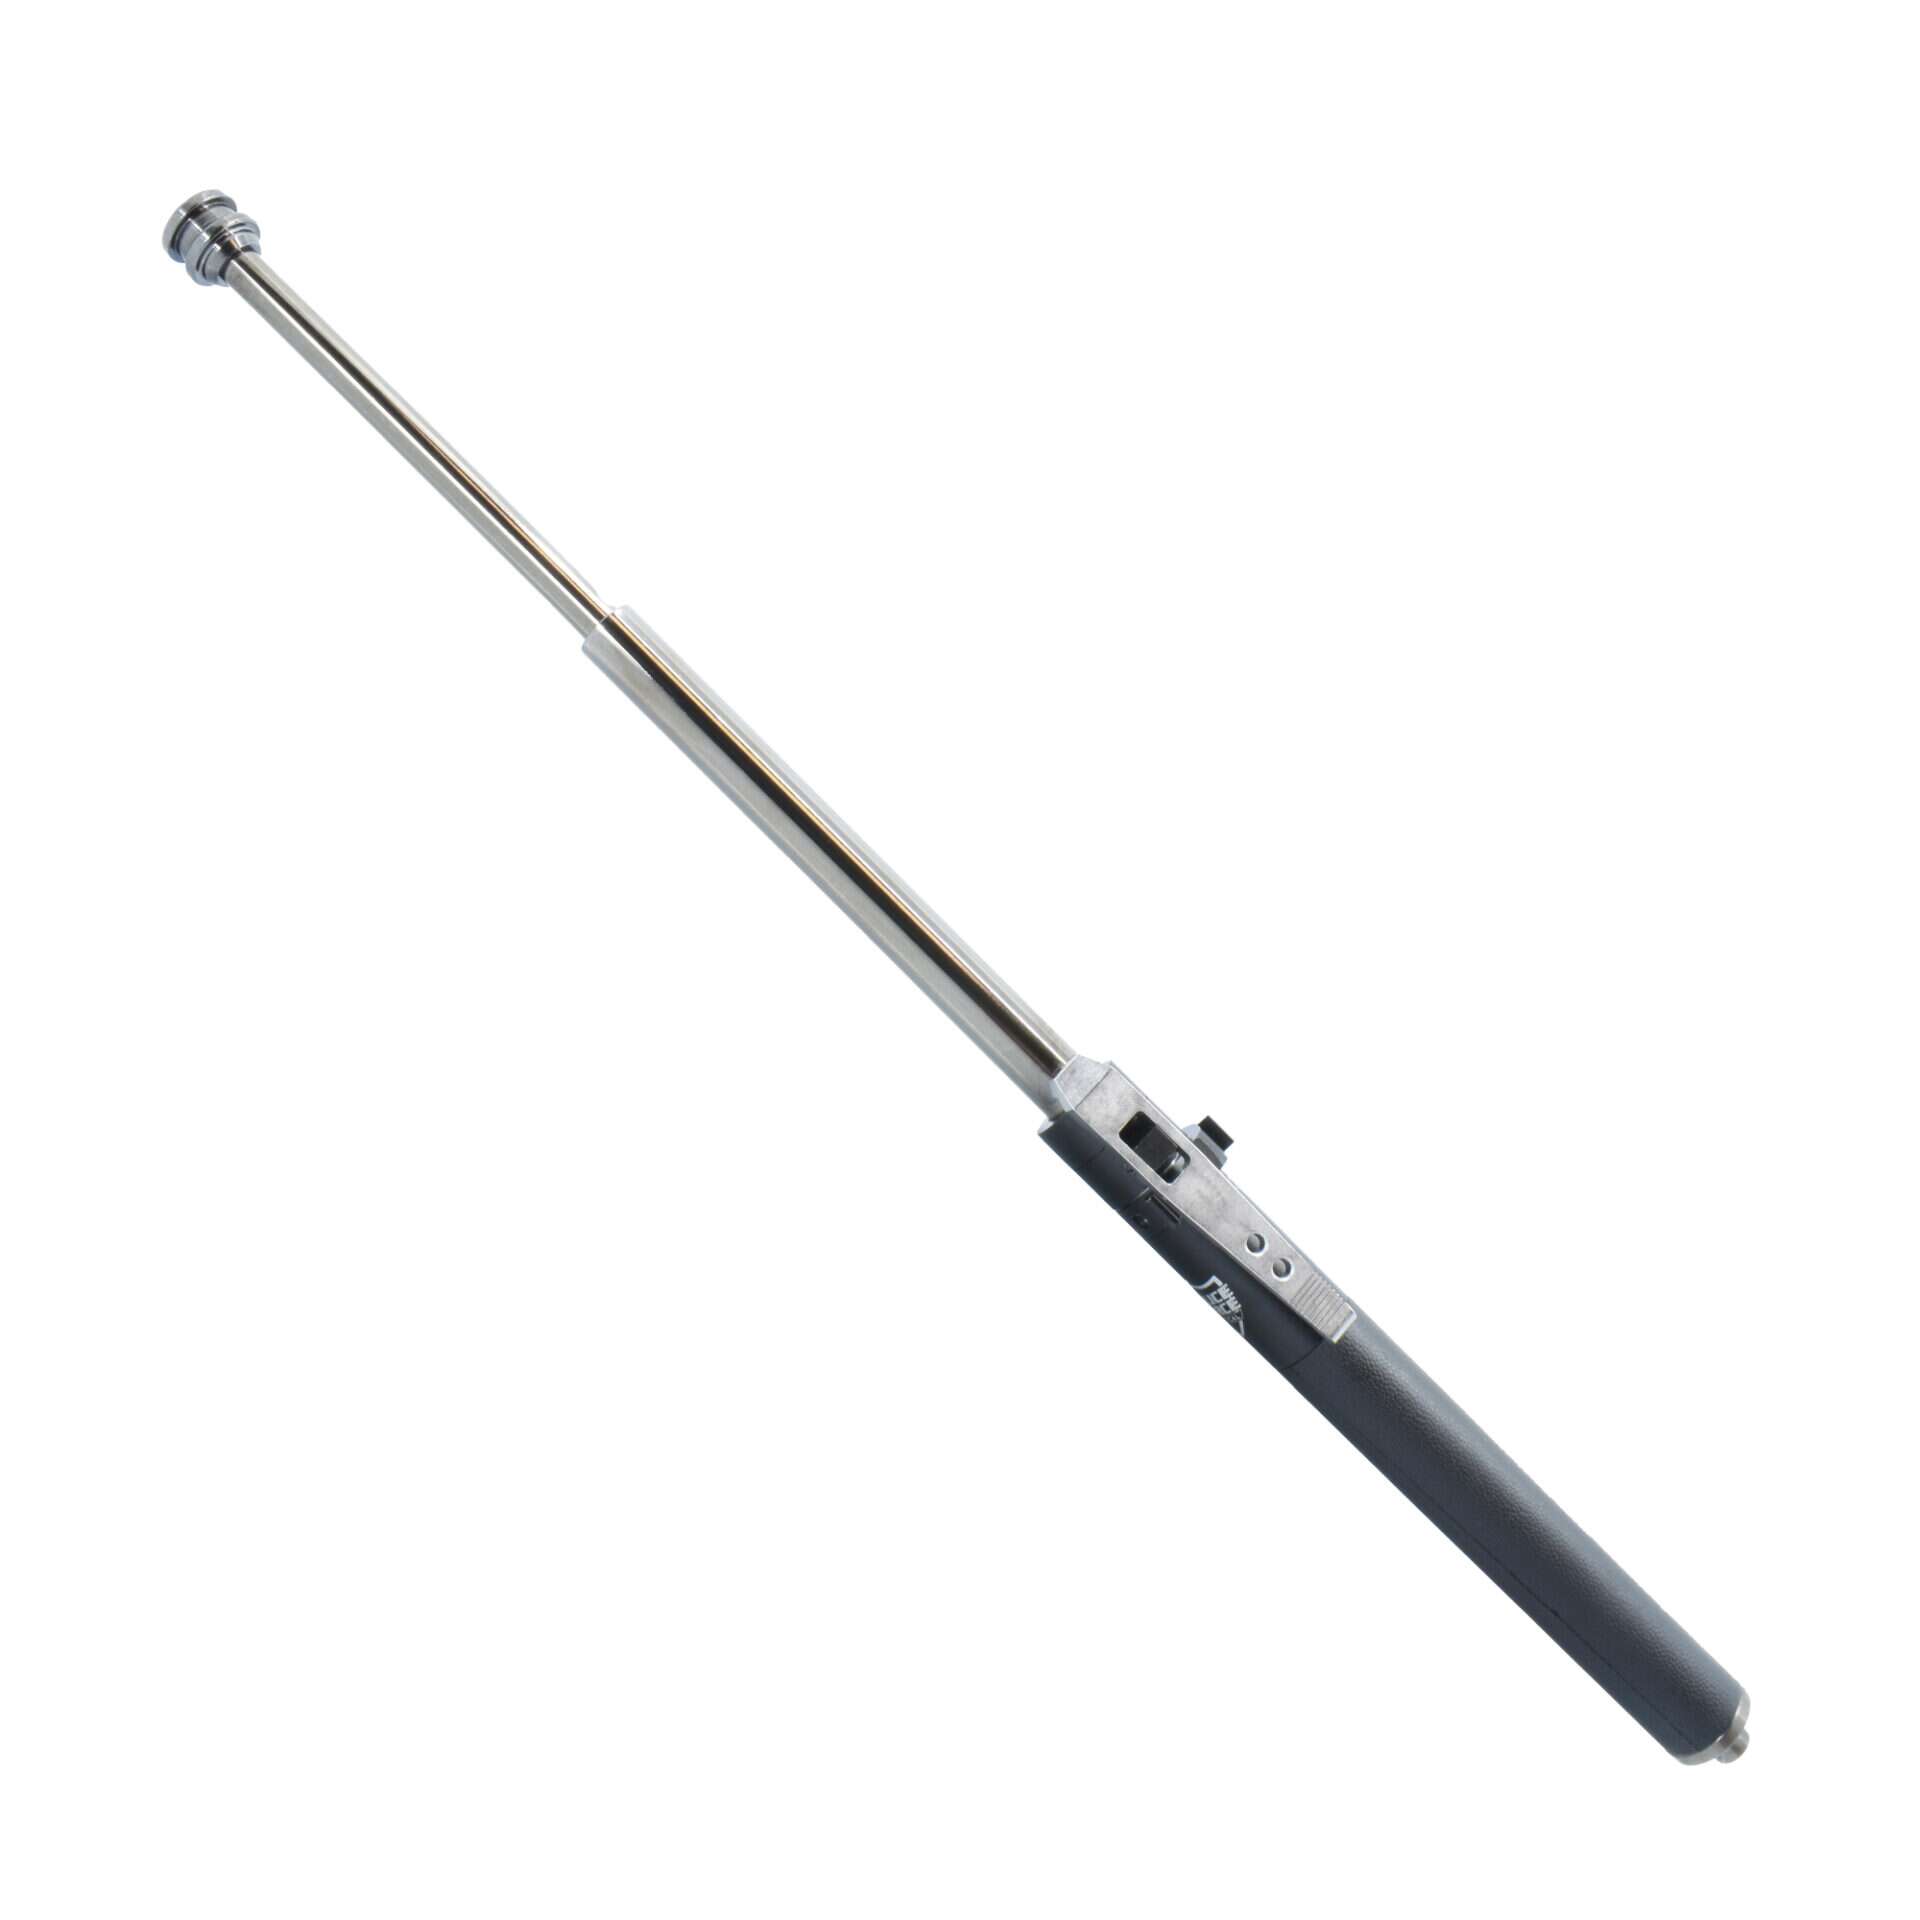 Police Force Tactical Next Generation 16" Automatic Steel Baton - The Ultimate Self-Defense Tool